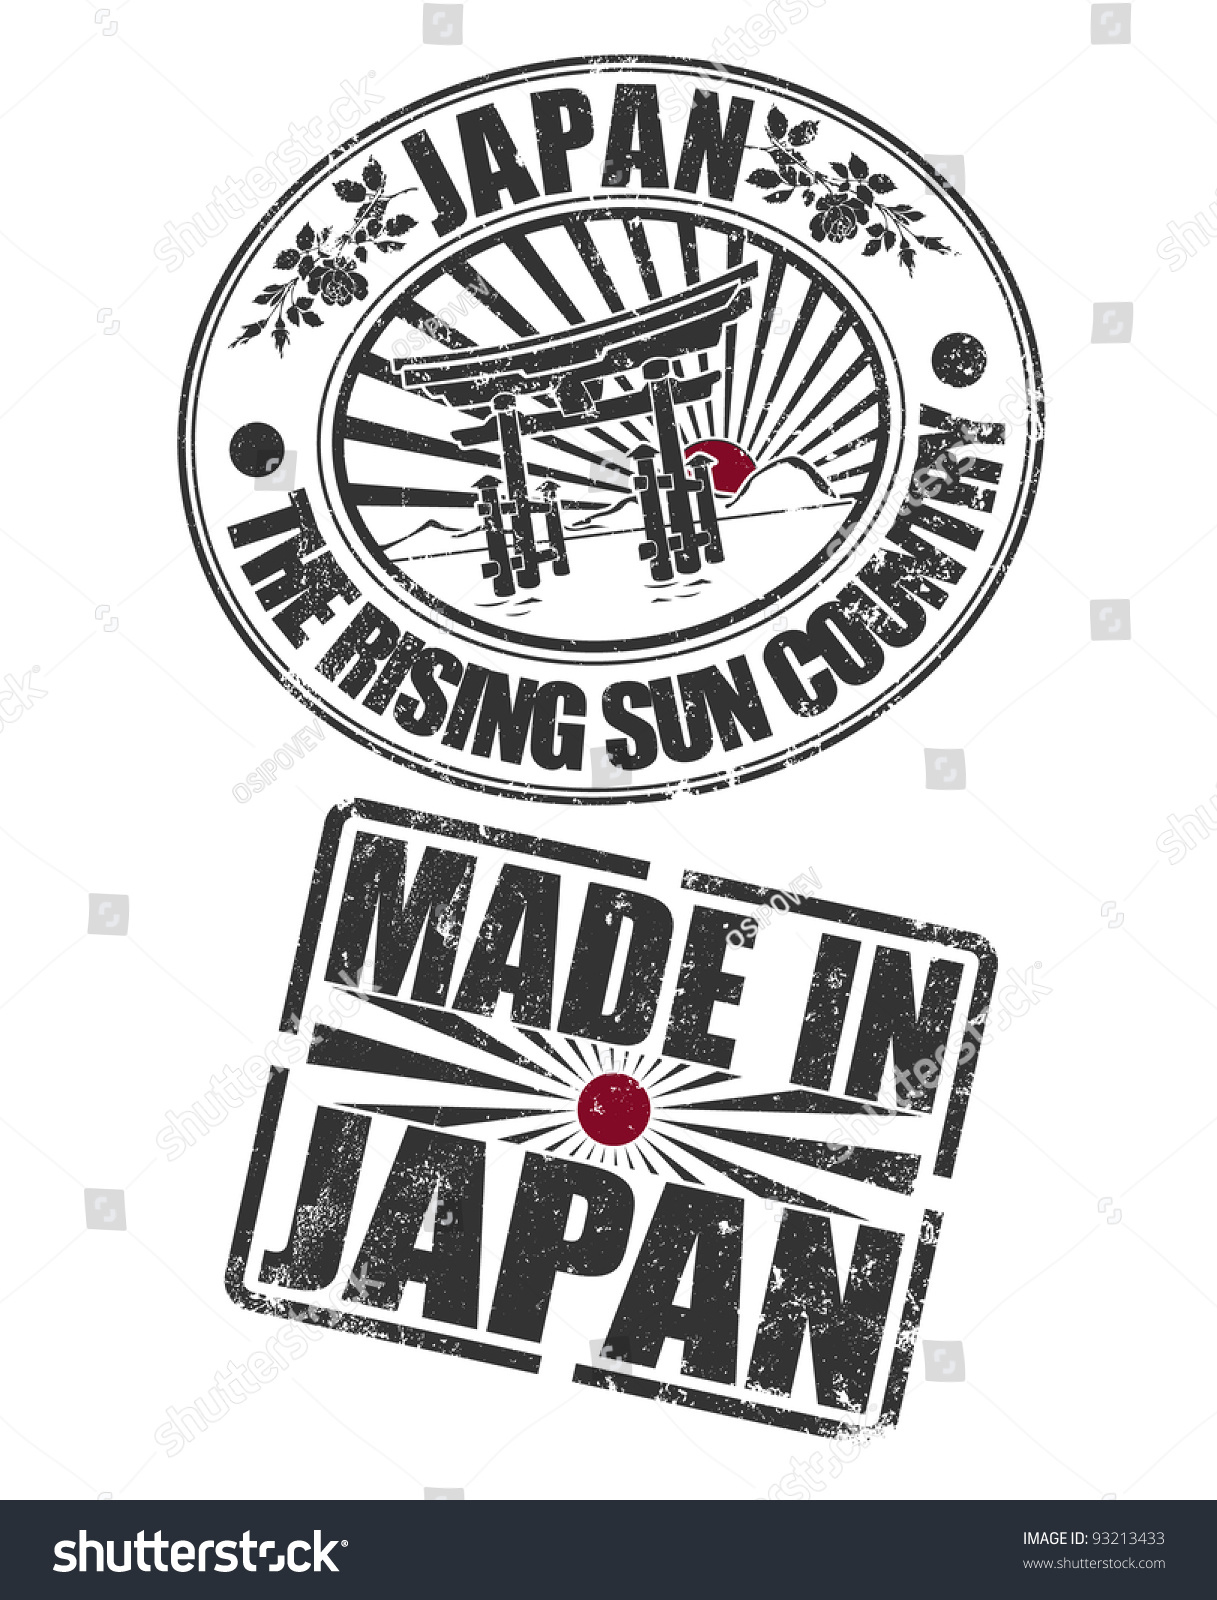 Stamp Of Japan And Rising Sun Stock Vector Illustration 93213433 ...